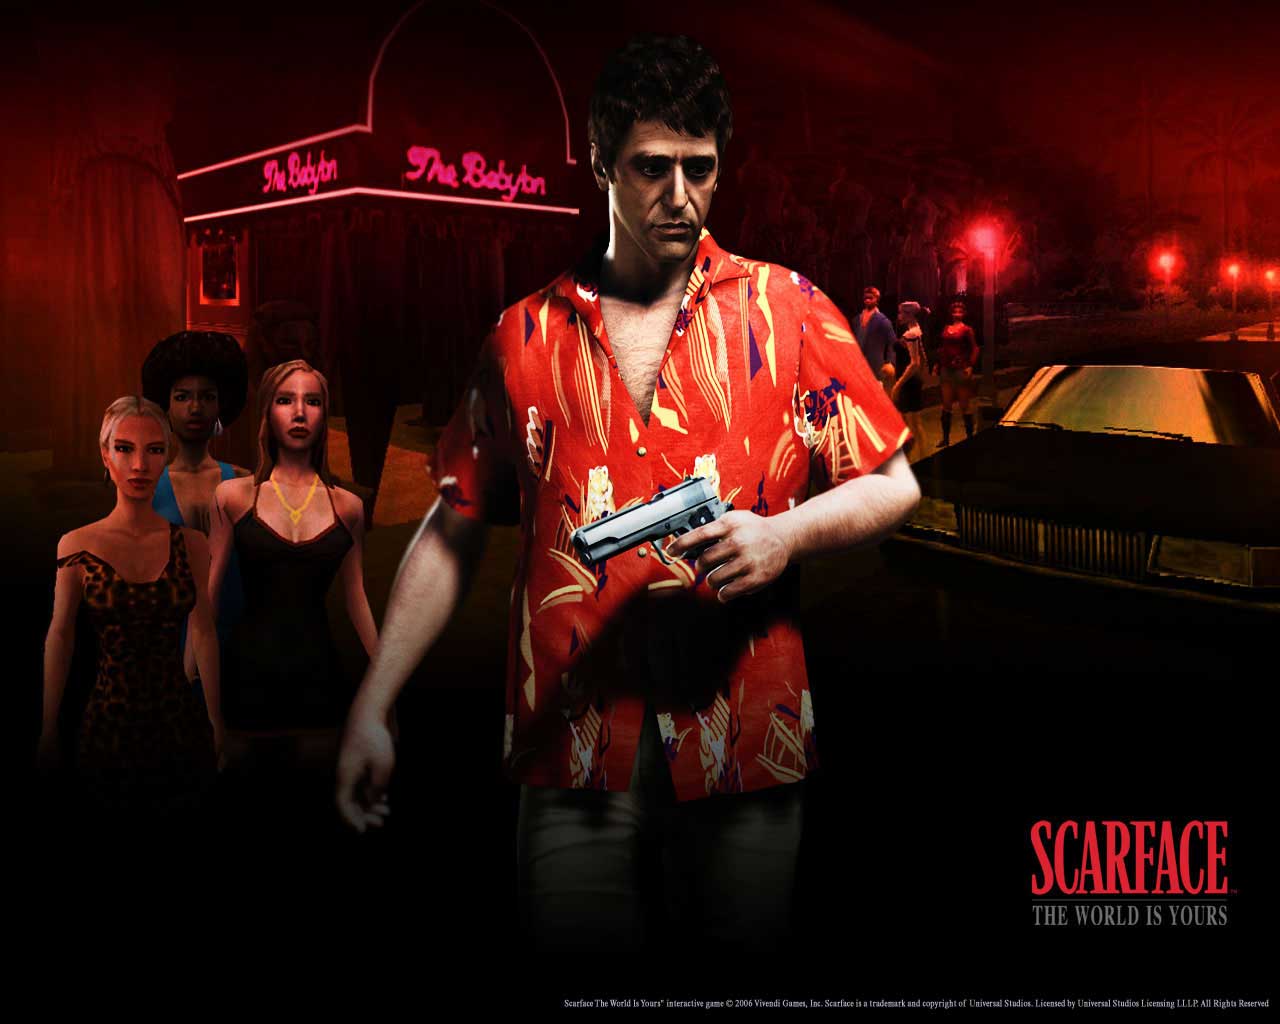 Scarface Wallpaper Of Movie